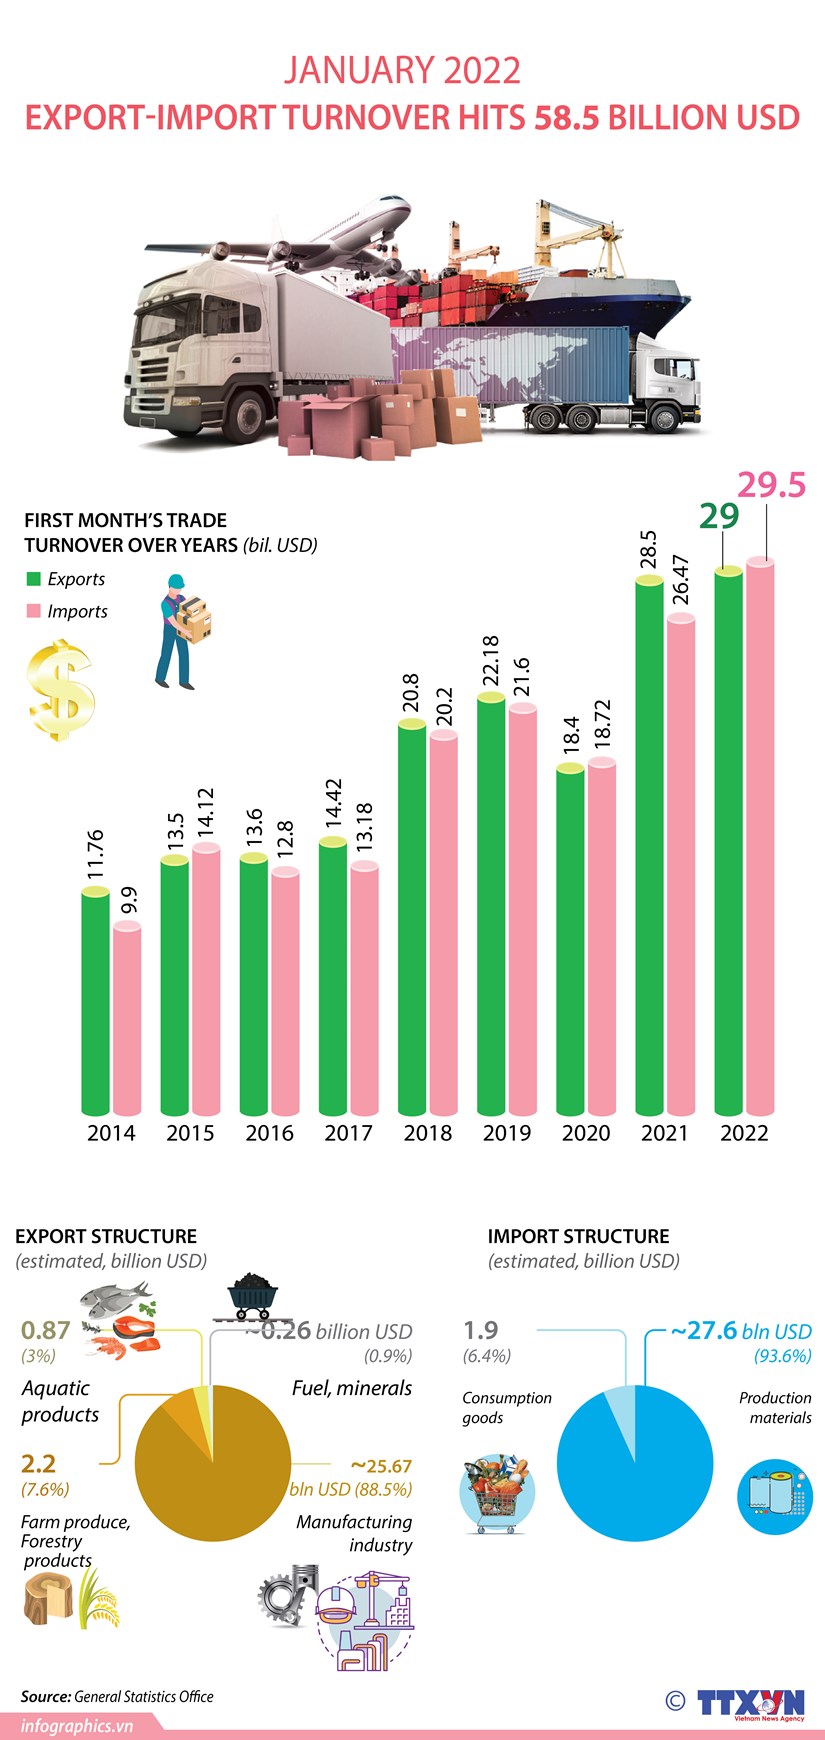 Export-import turnover hits 58.5 billion USD hinh anh 1